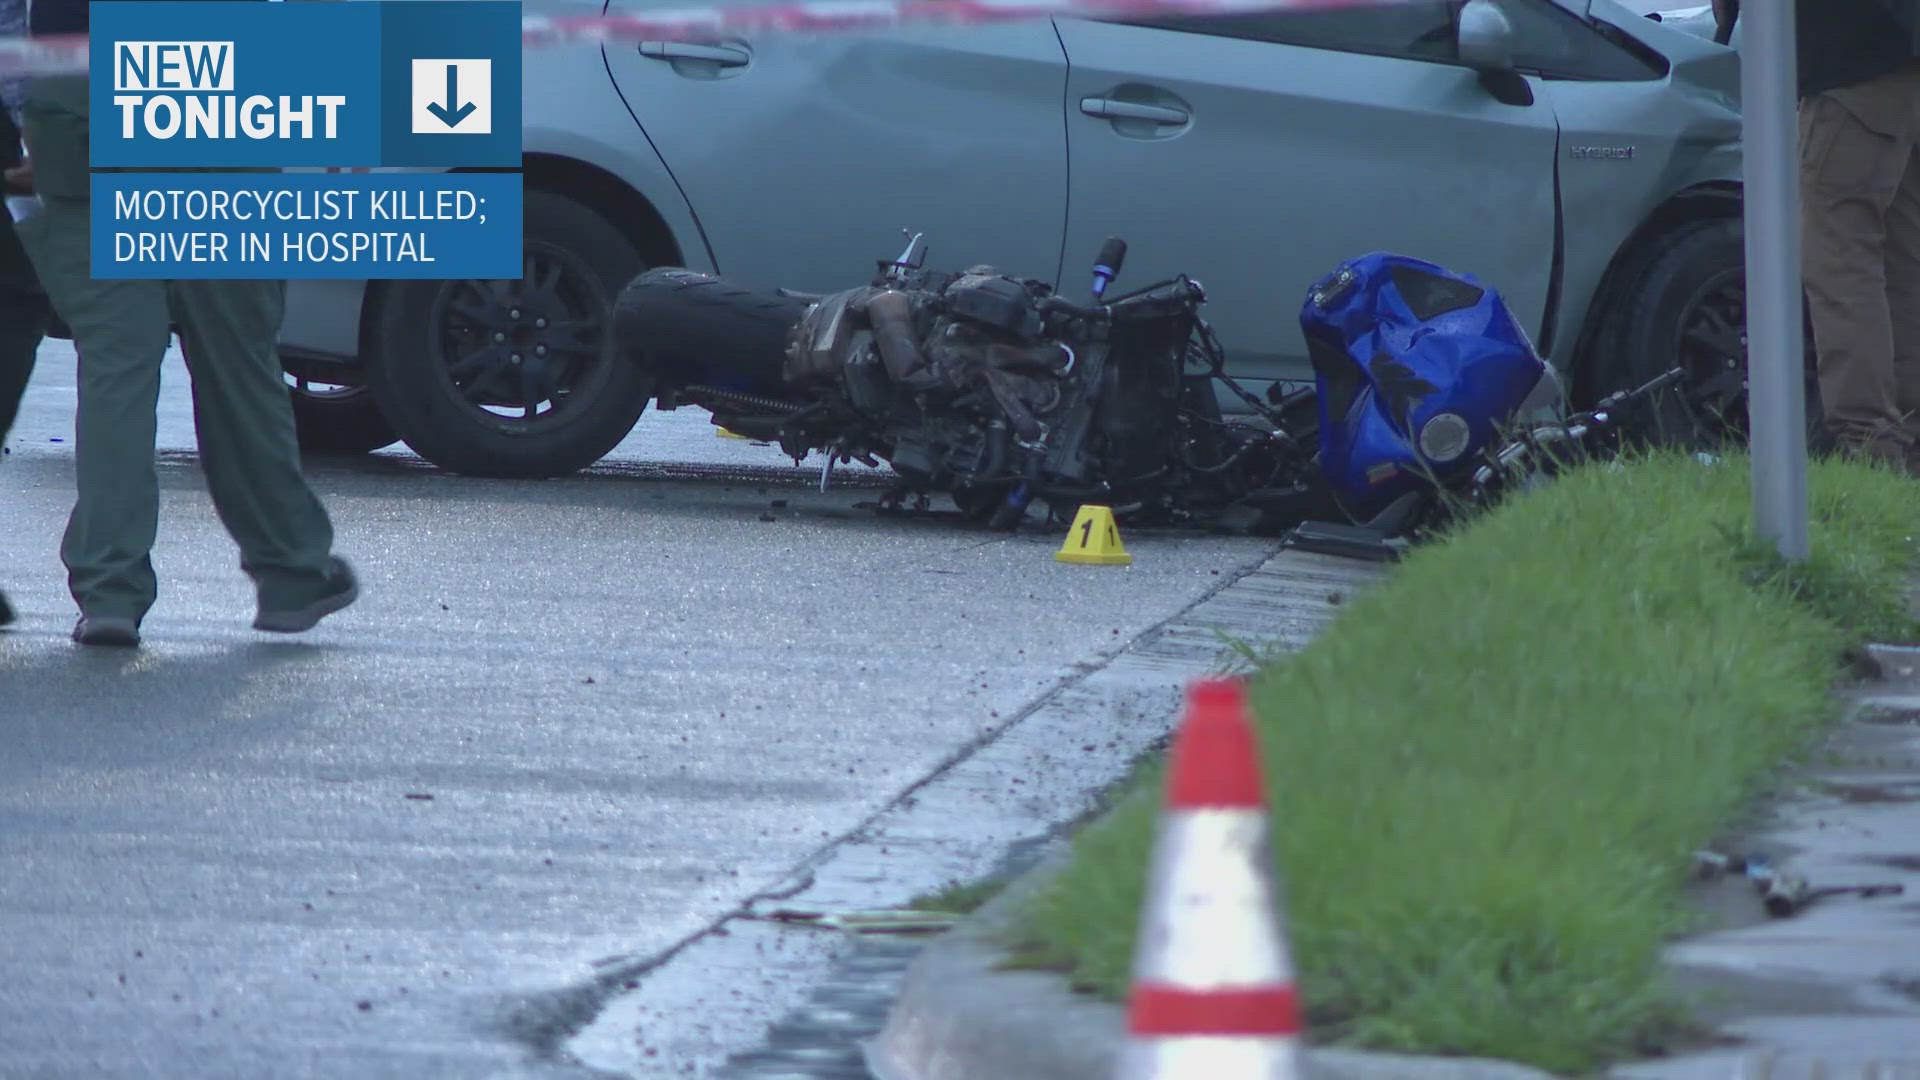 This marks the 13th motorcyclist killed in a crash in Duval County this year, according to the Jacksonville Sheriff's Office.